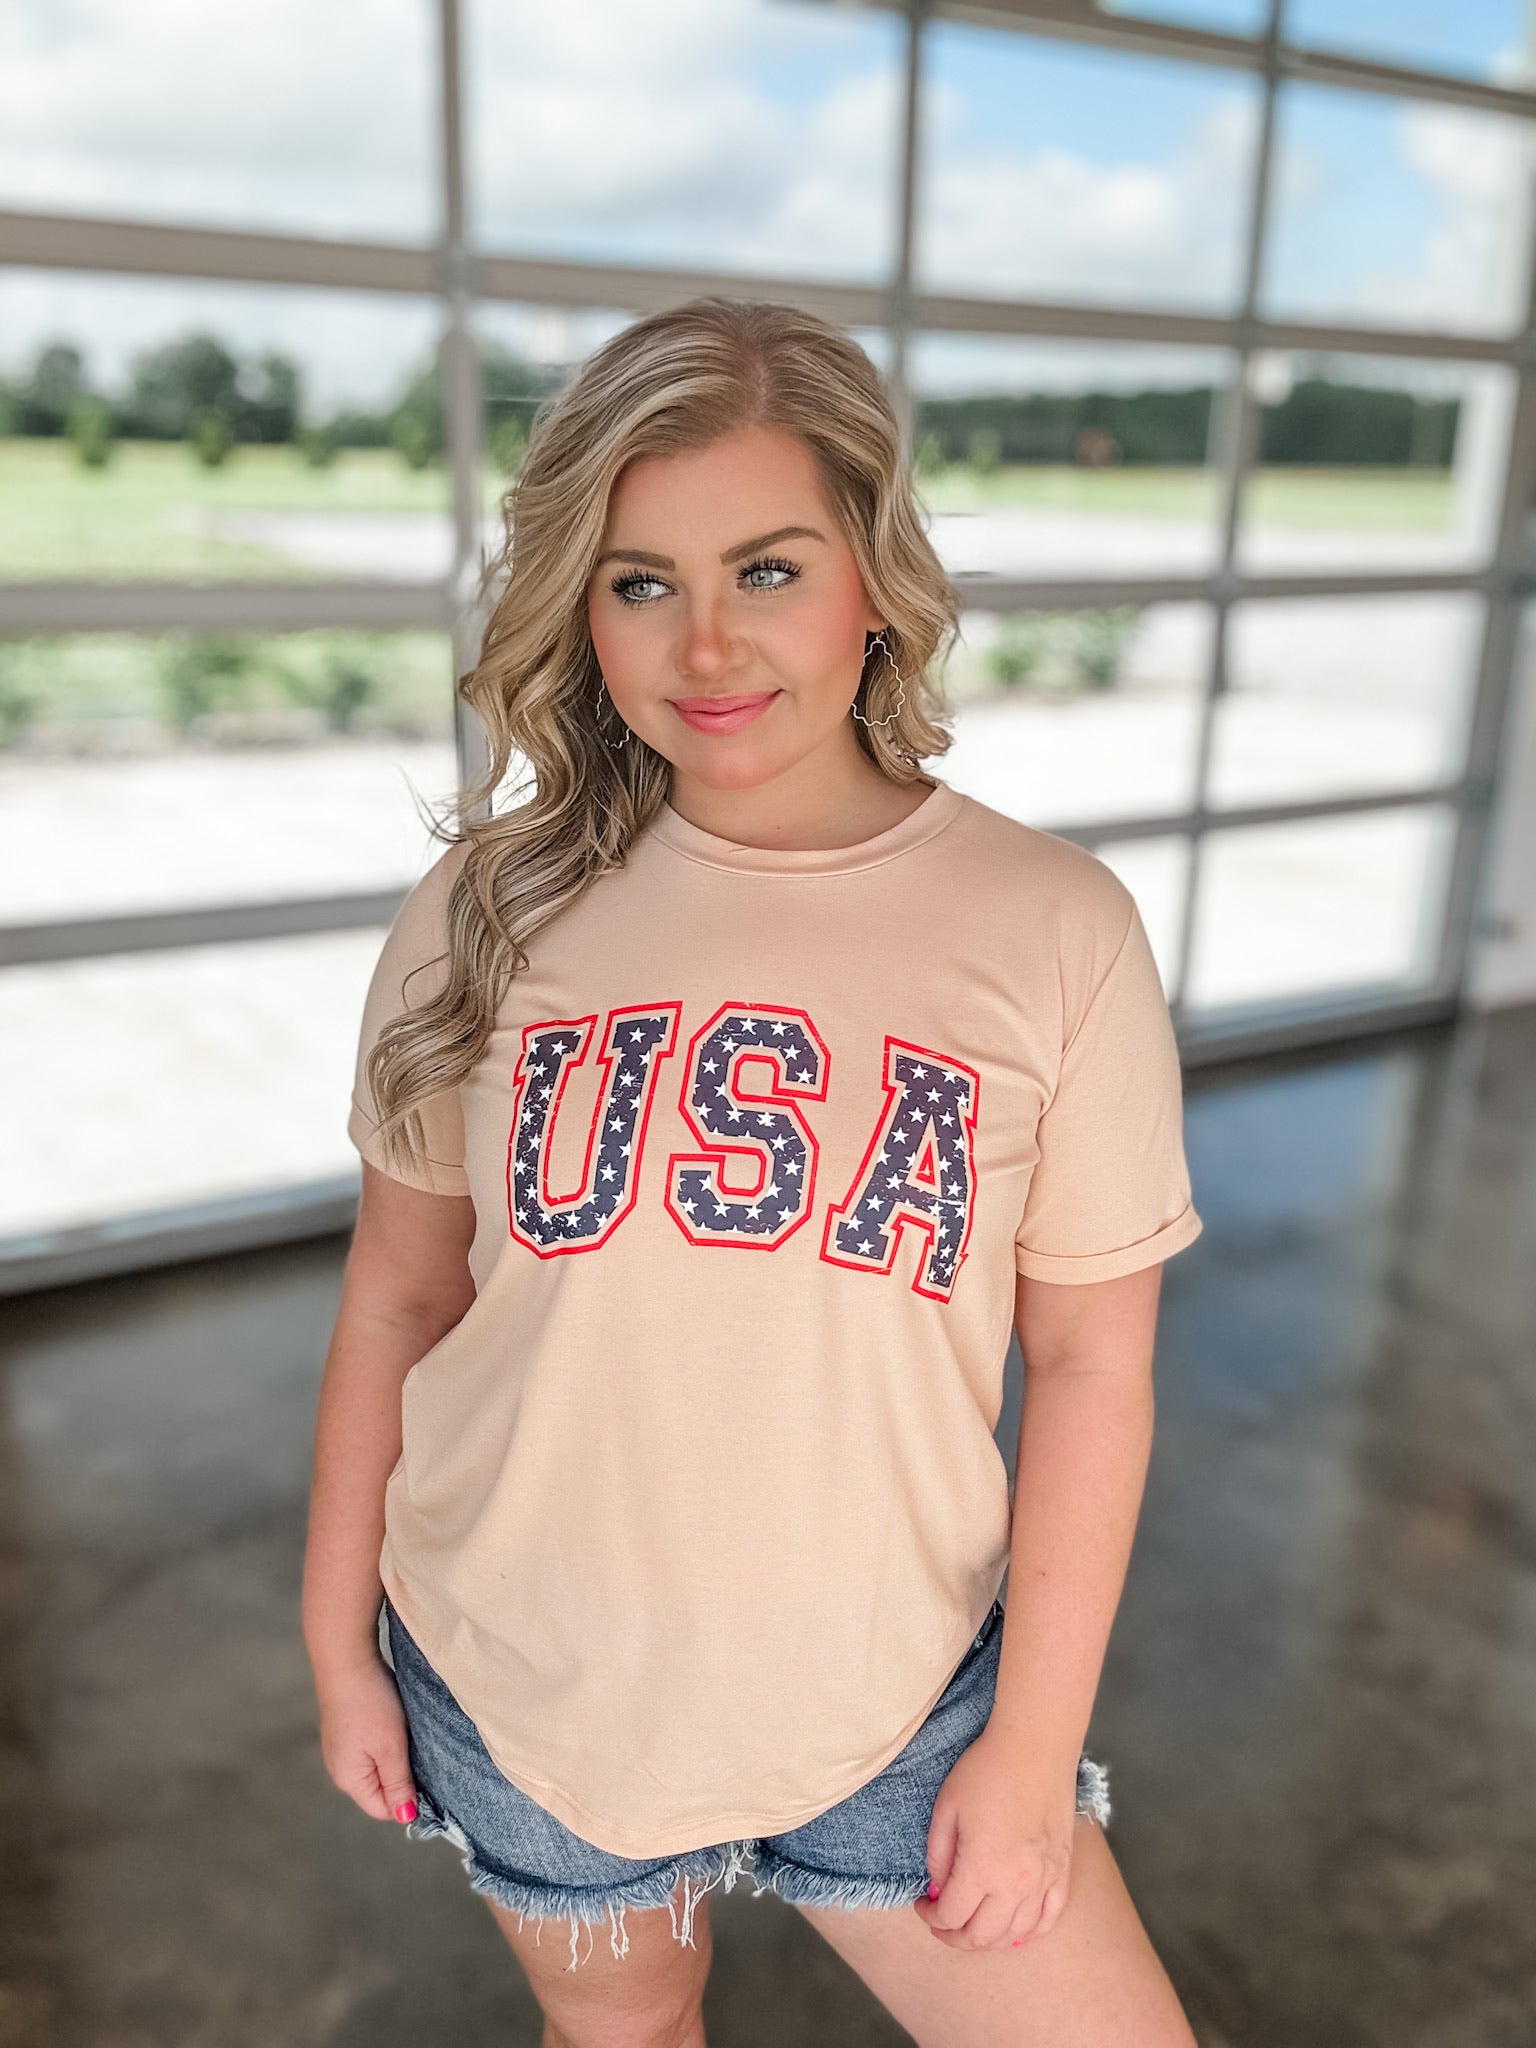 Starry USA Lettering Graphic Tee FINAL SALE